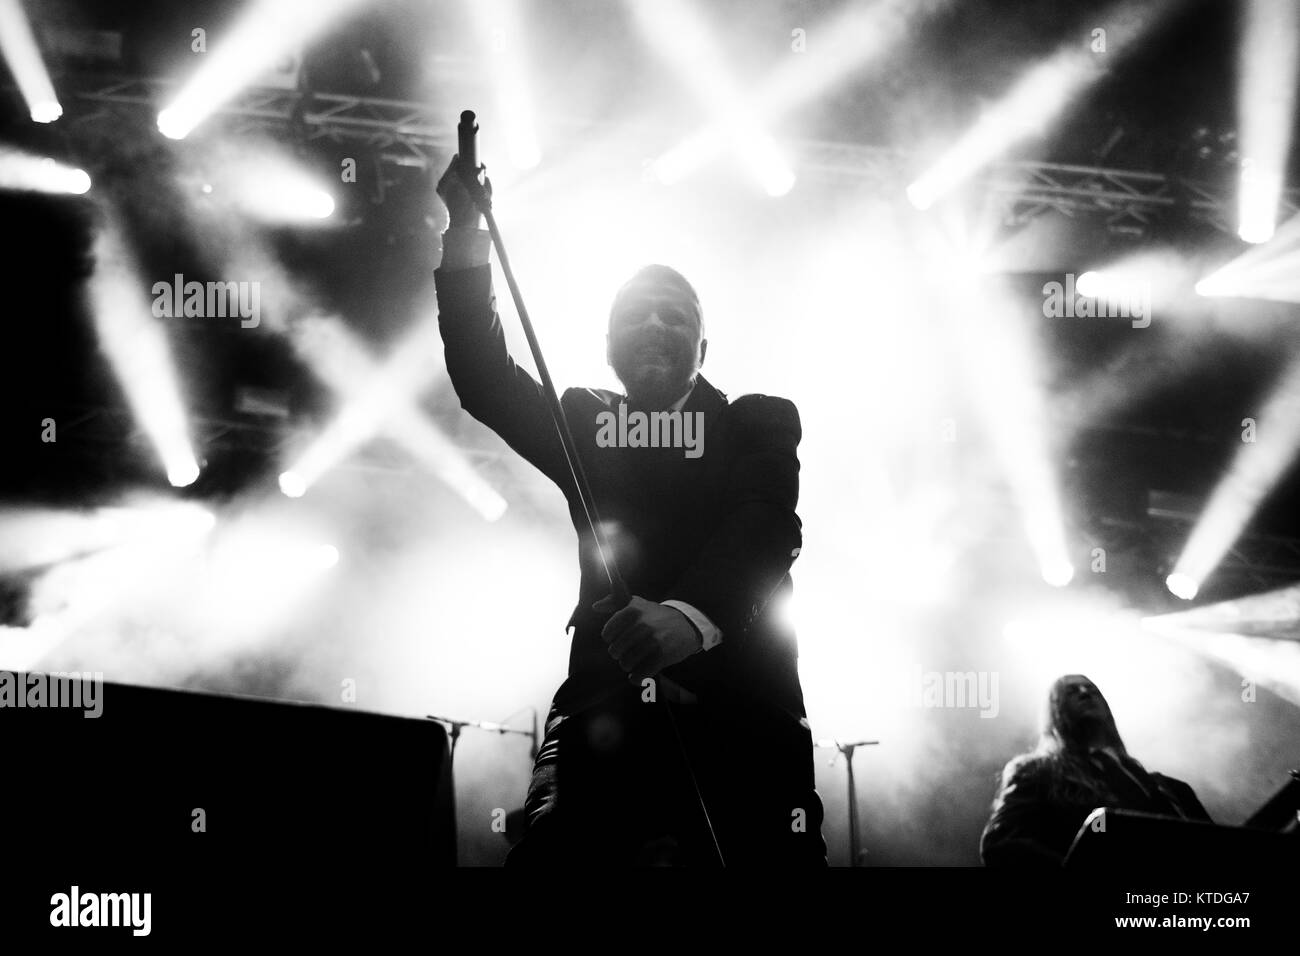 The Faroese doom metal band Hamferð (Hamferd) performs a live concert at the Faroese music festival G! Festival 2014. Here vocalist Jón Aldará is pictured live on stage. Faroe Islands, 18.07.2014. Stock Photo